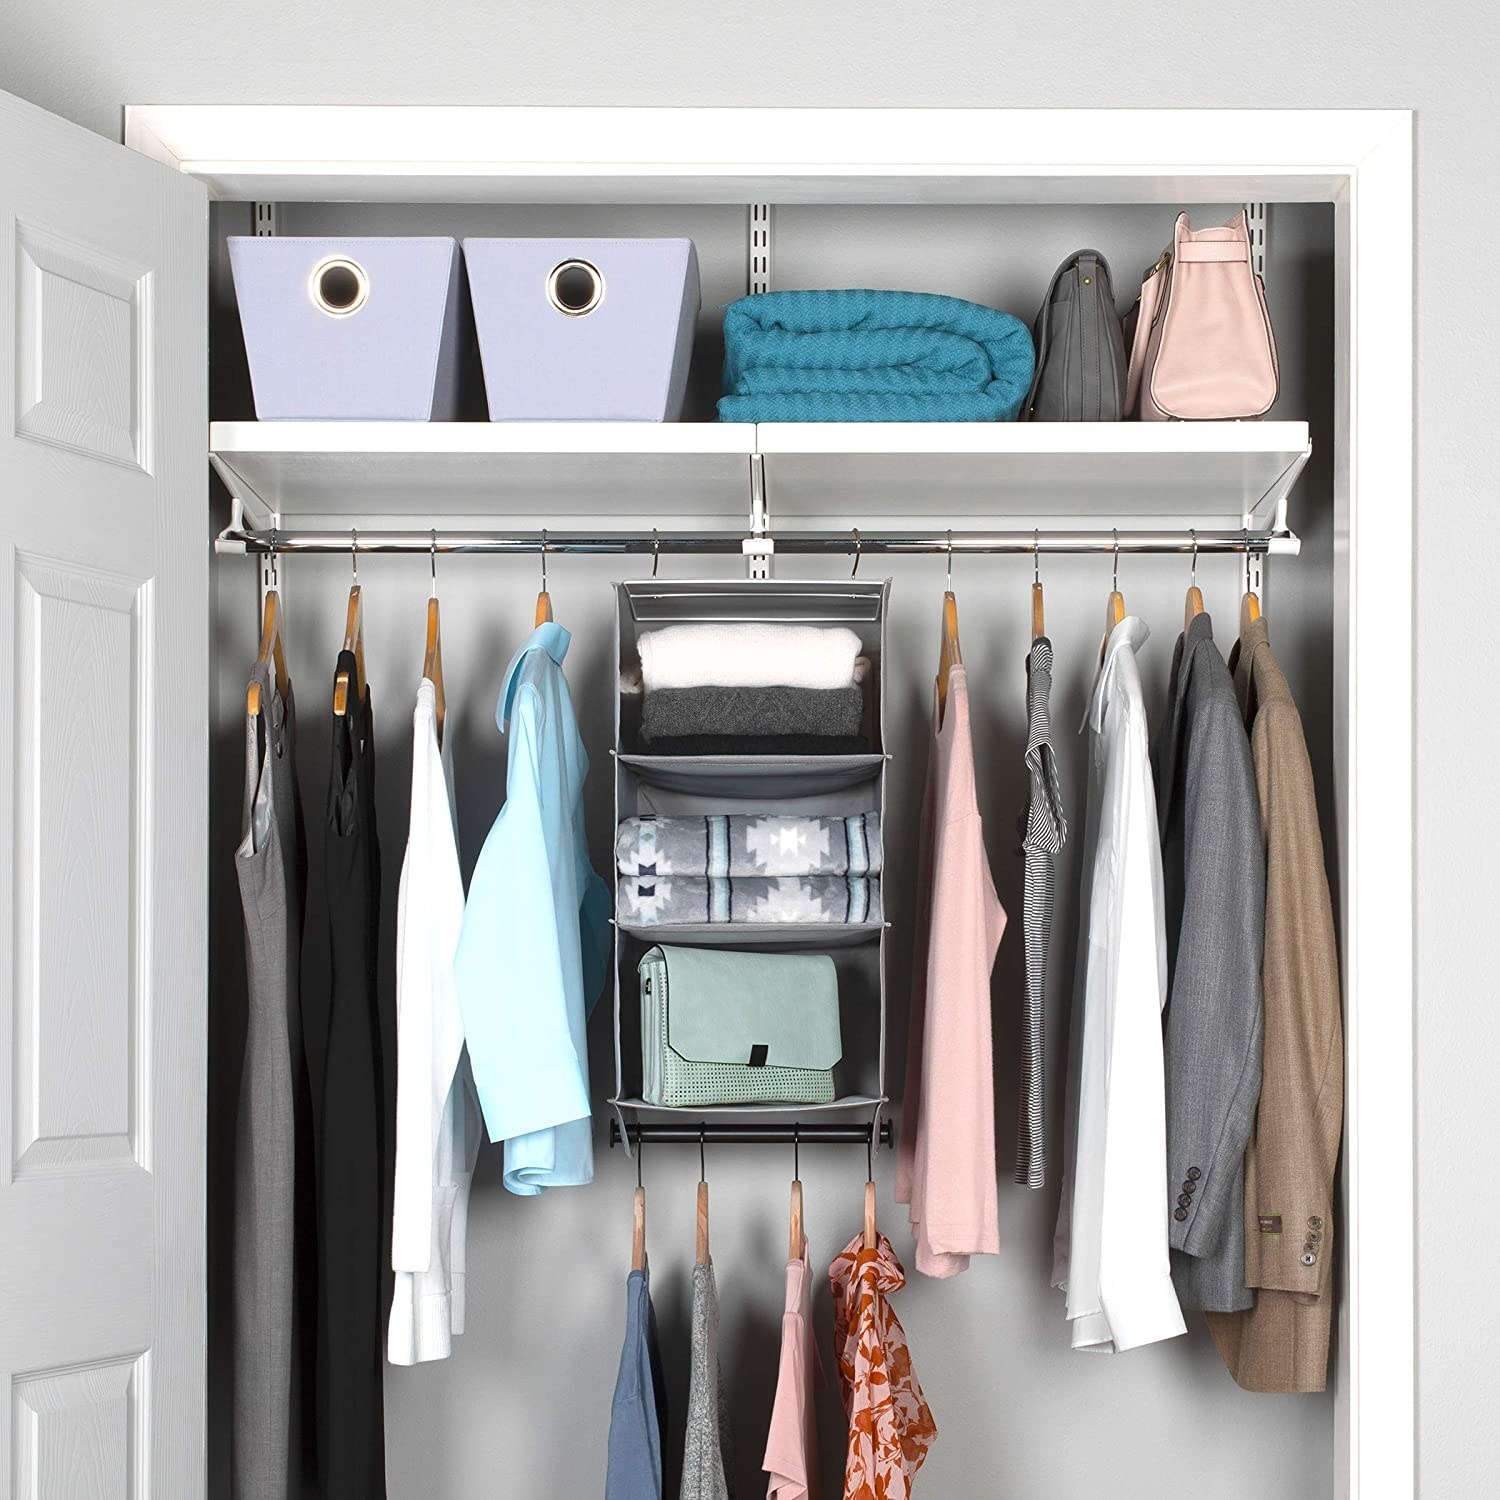 A hanging closet organizer with a garment rod that can store clothes, scarves, and handbags simultaneously